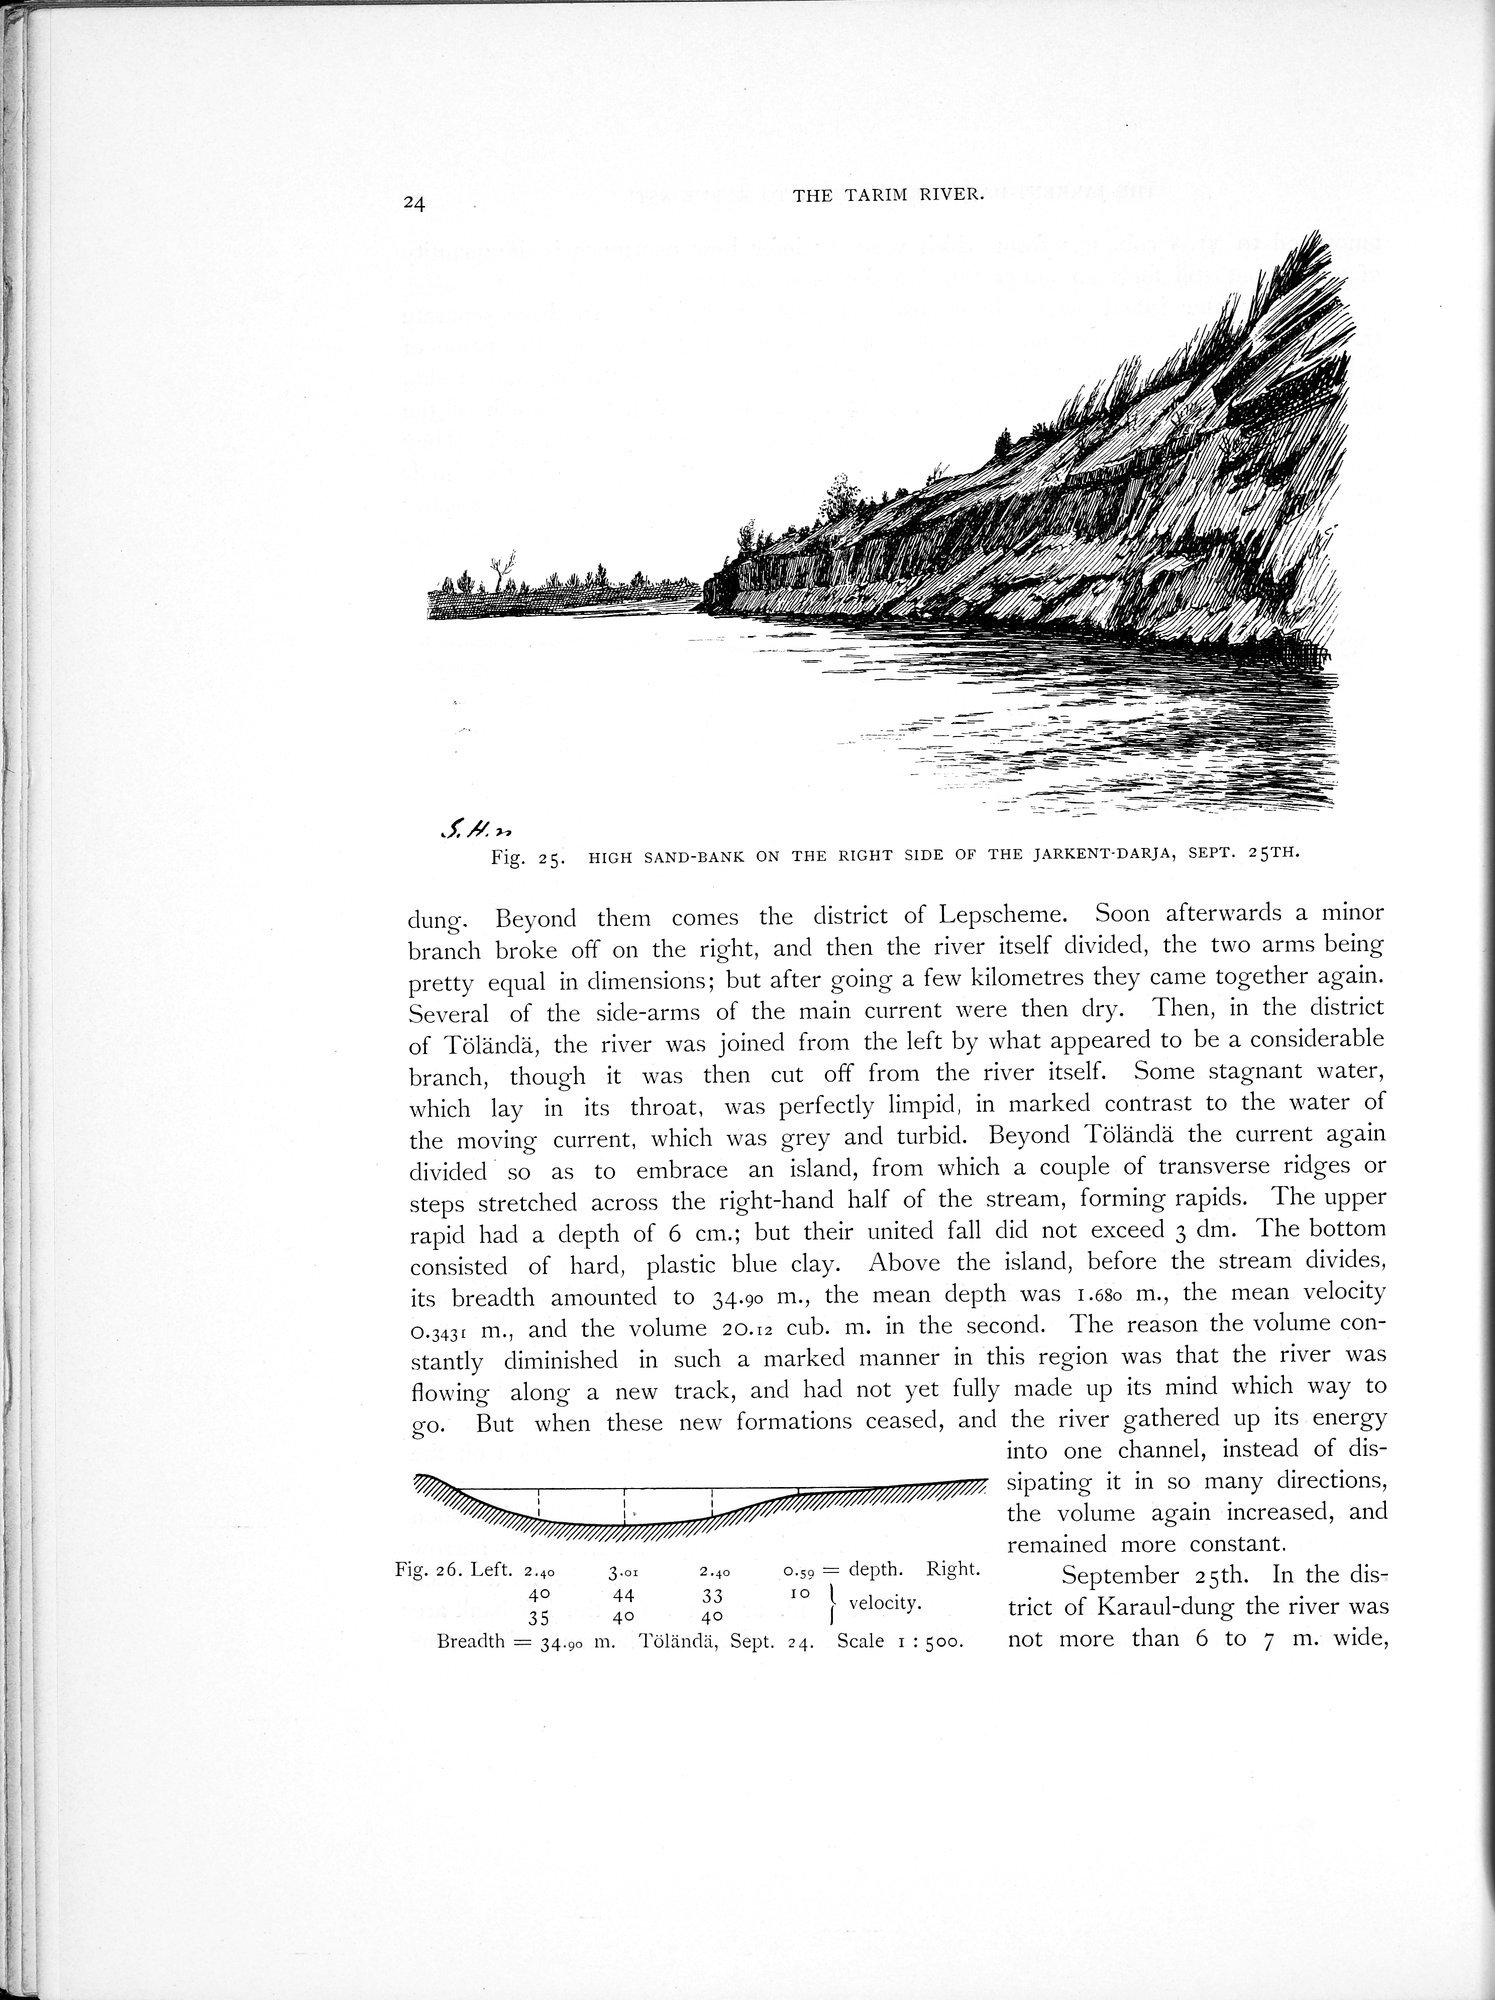 Scientific Results of a Journey in Central Asia, 1899-1902 : vol.1 / 46 ページ（白黒高解像度画像）